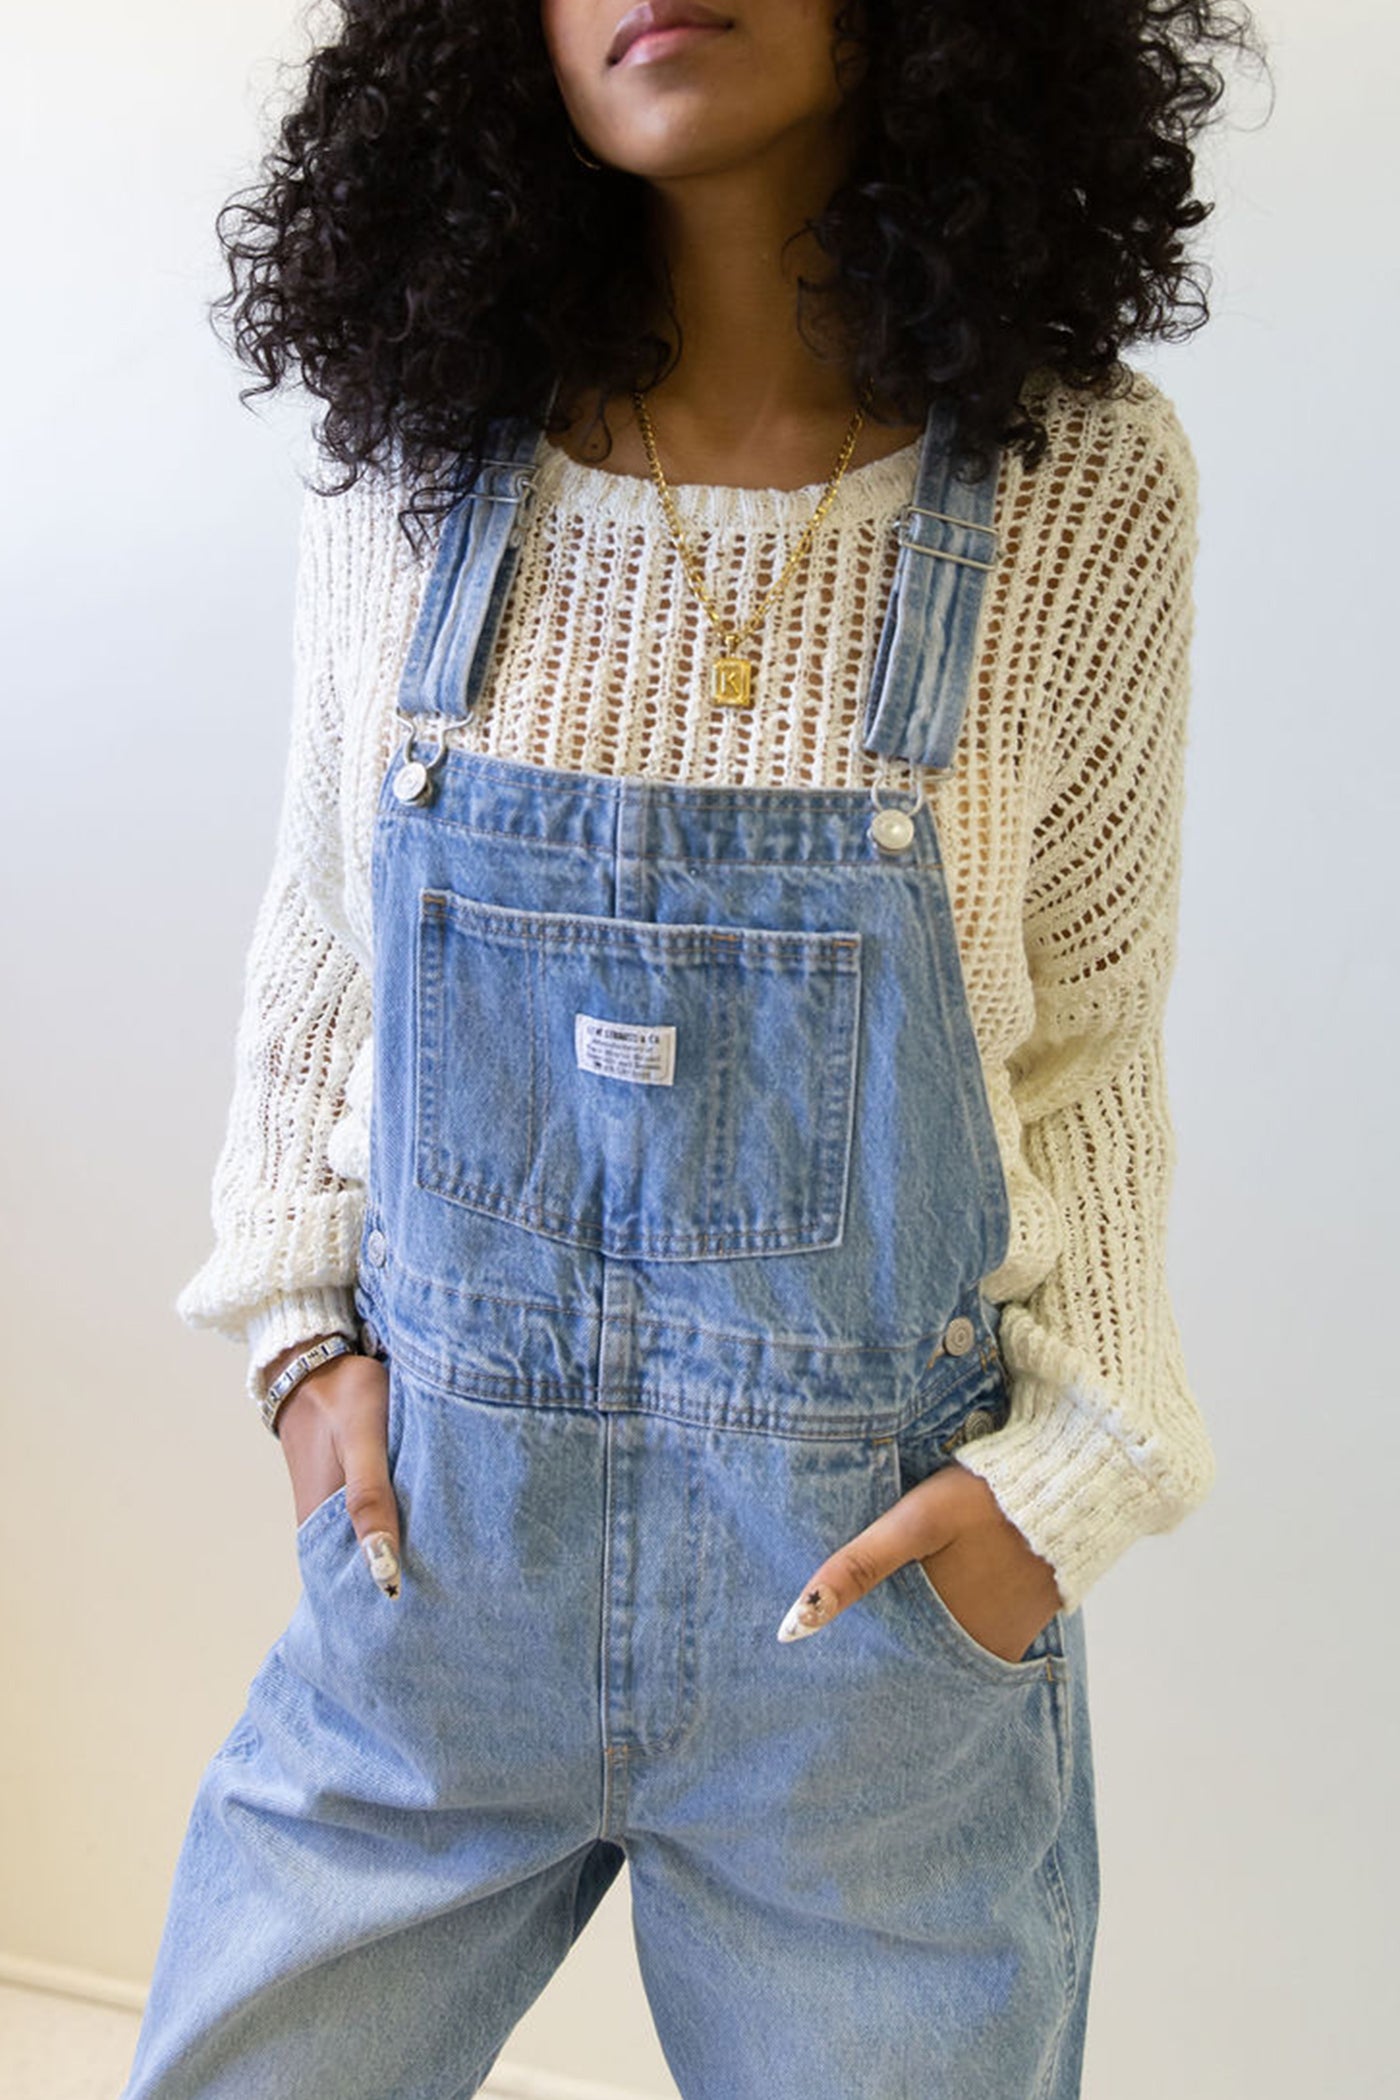 What A Delight Vintage Overalls by Levi's